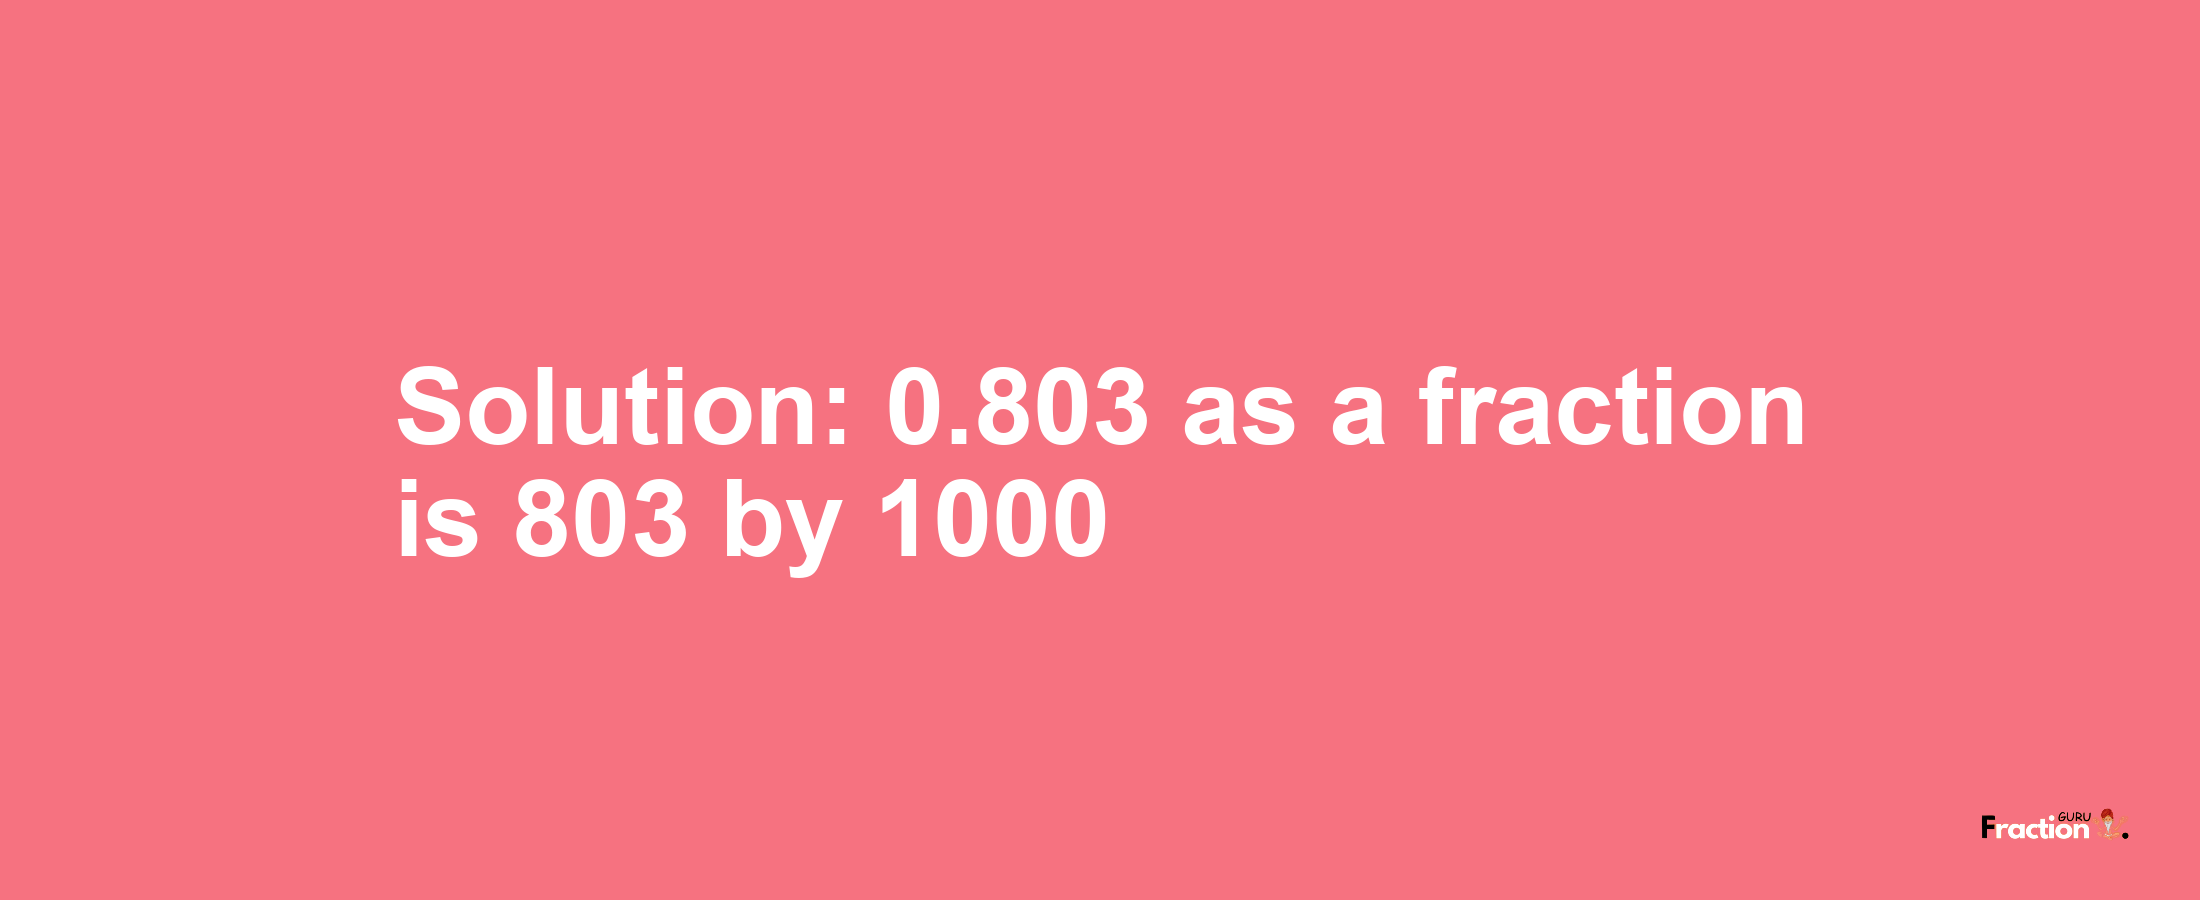 Solution:0.803 as a fraction is 803/1000